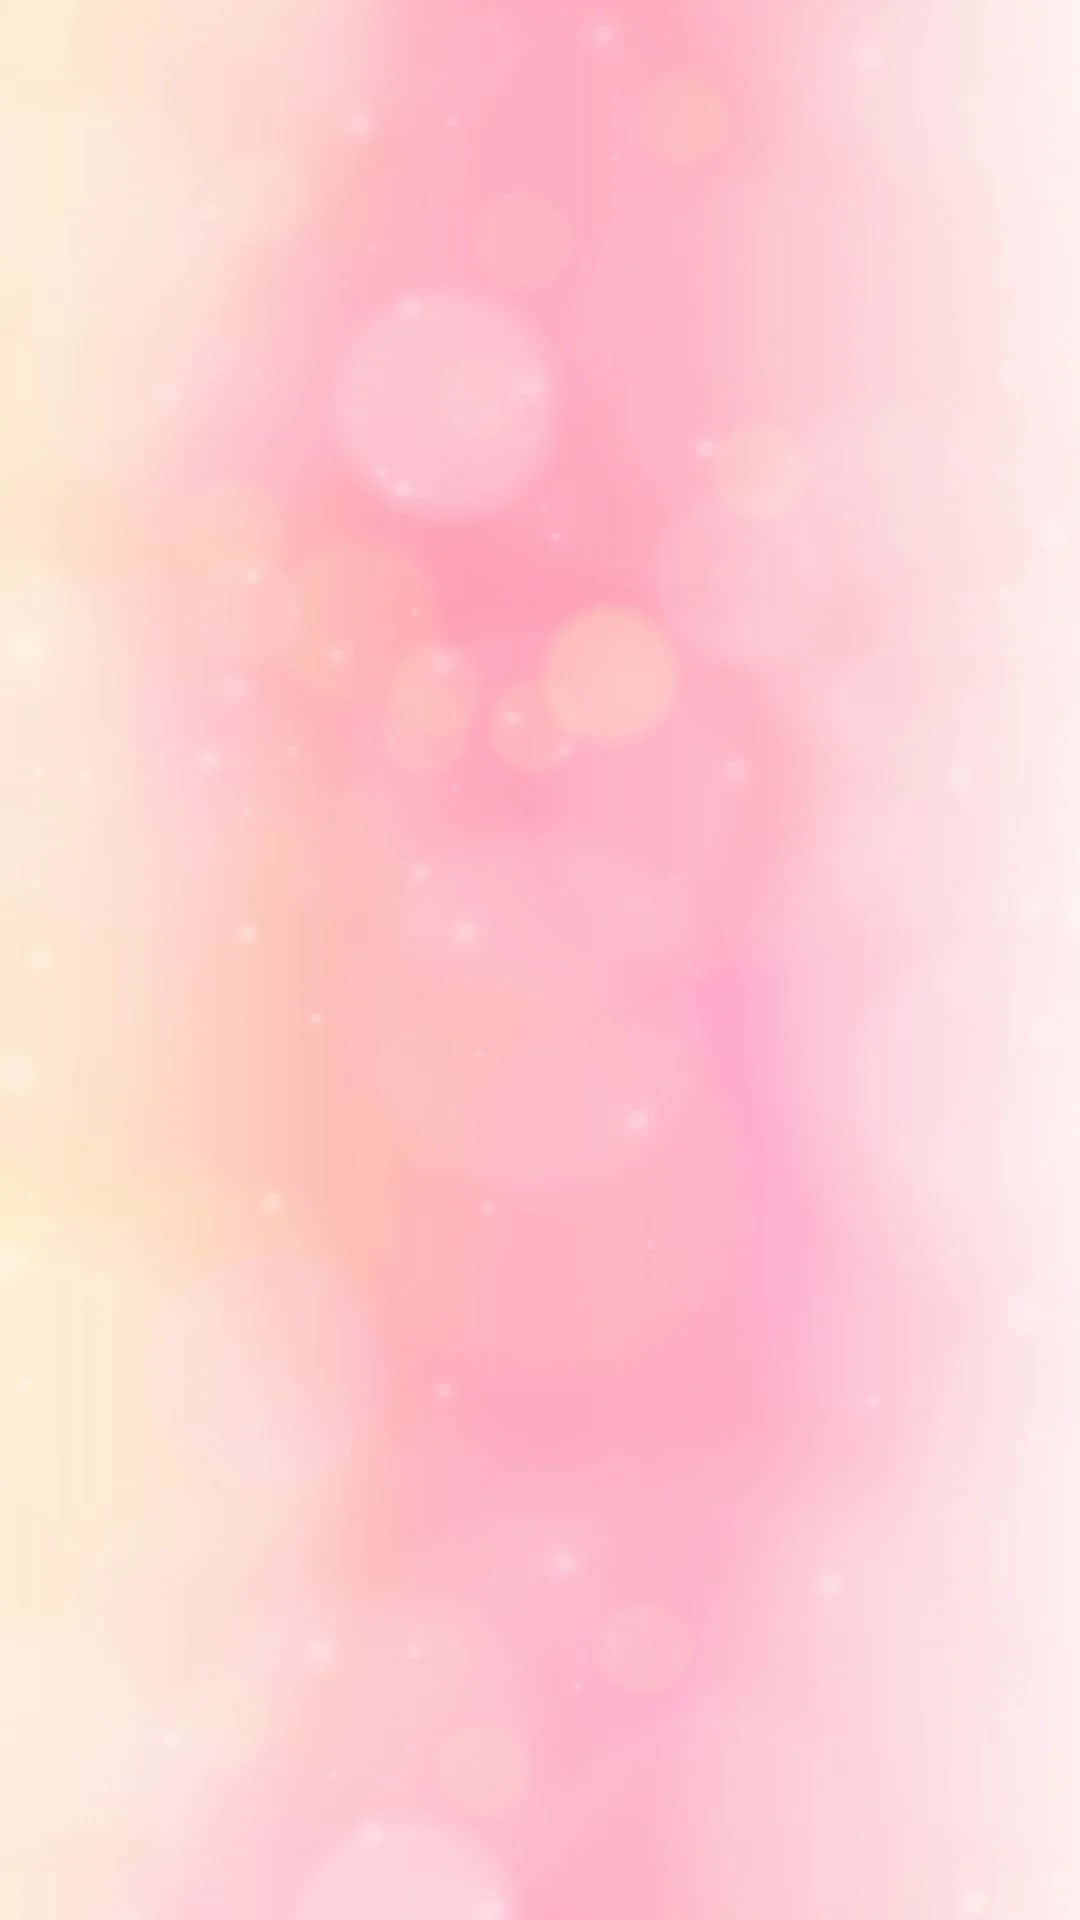 100+] Pink Phone Backgrounds